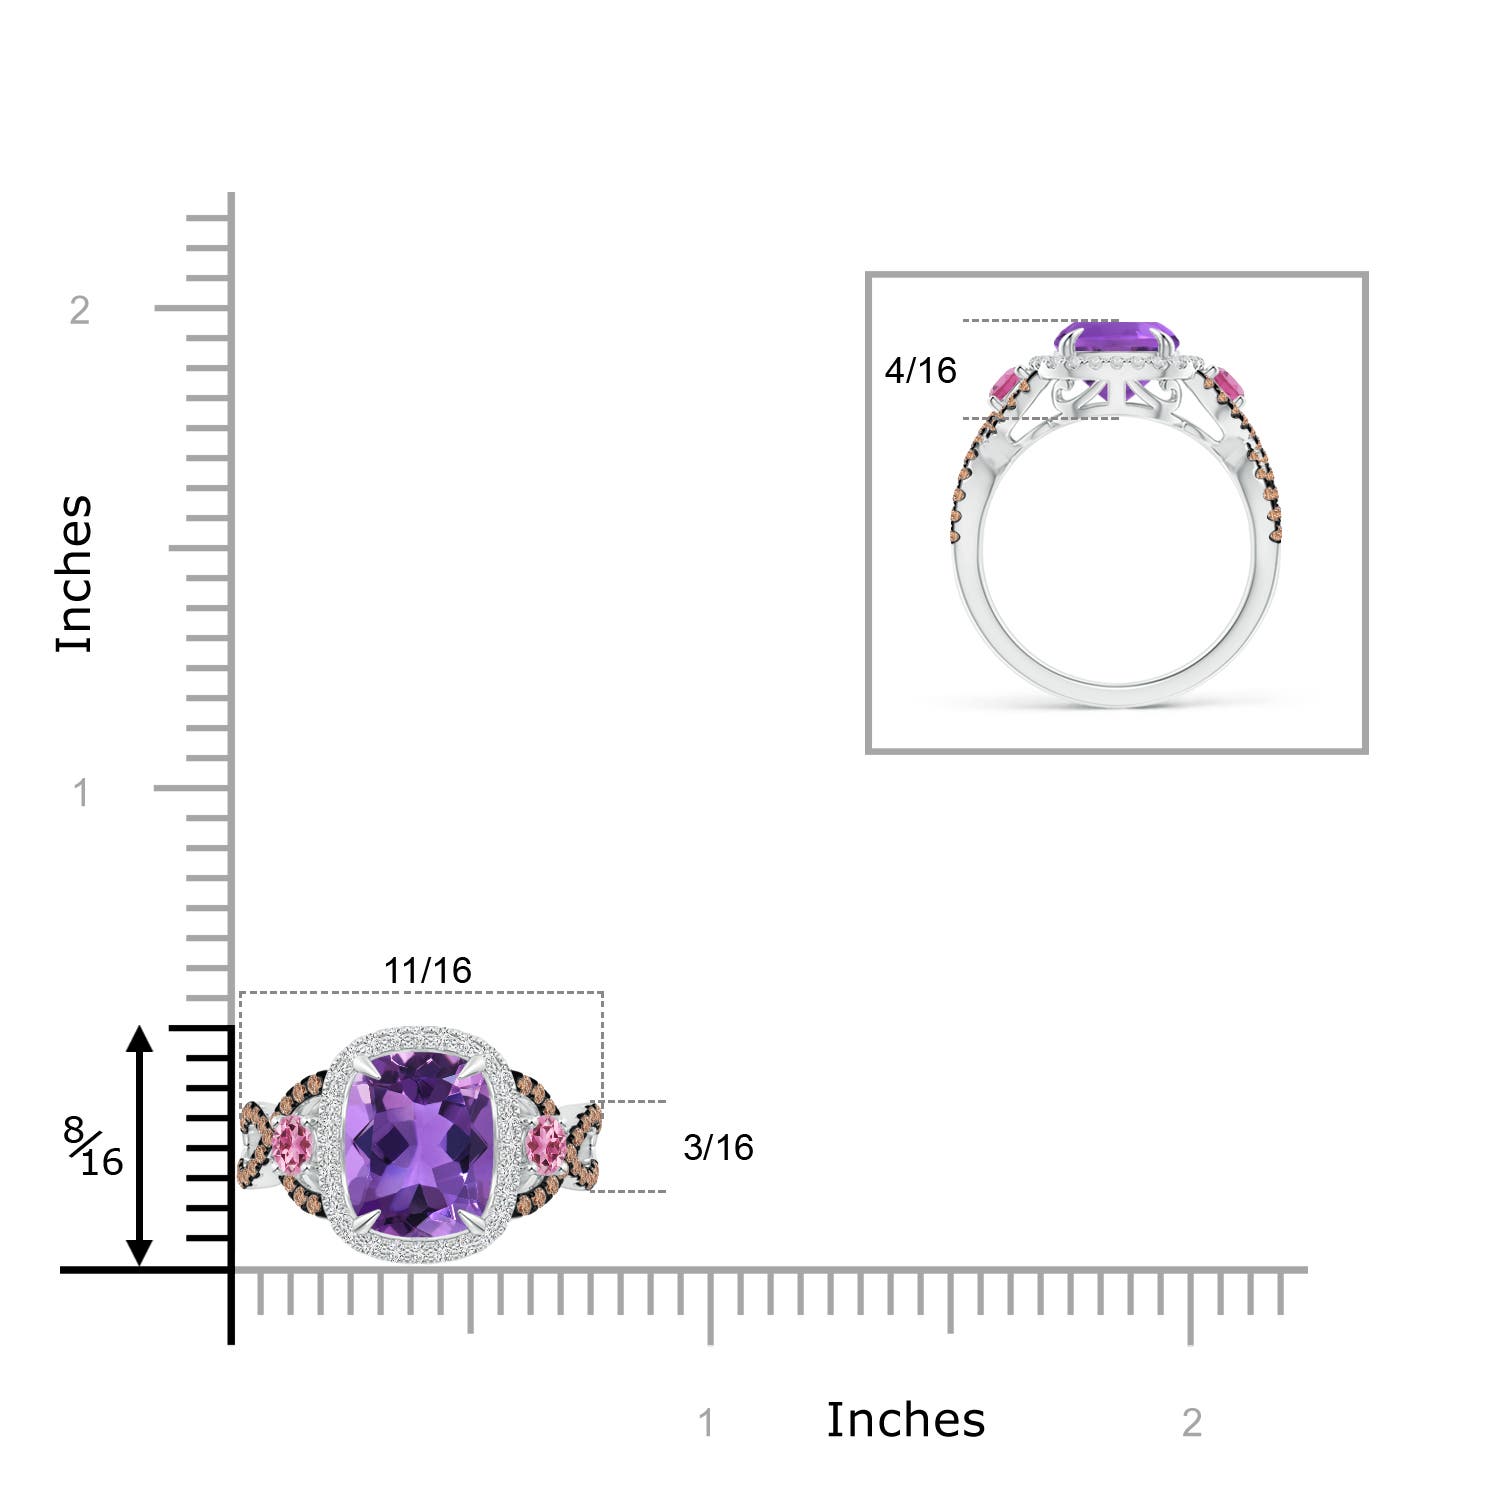 AAA - Amethyst / 3.39 CT / 14 KT White Gold